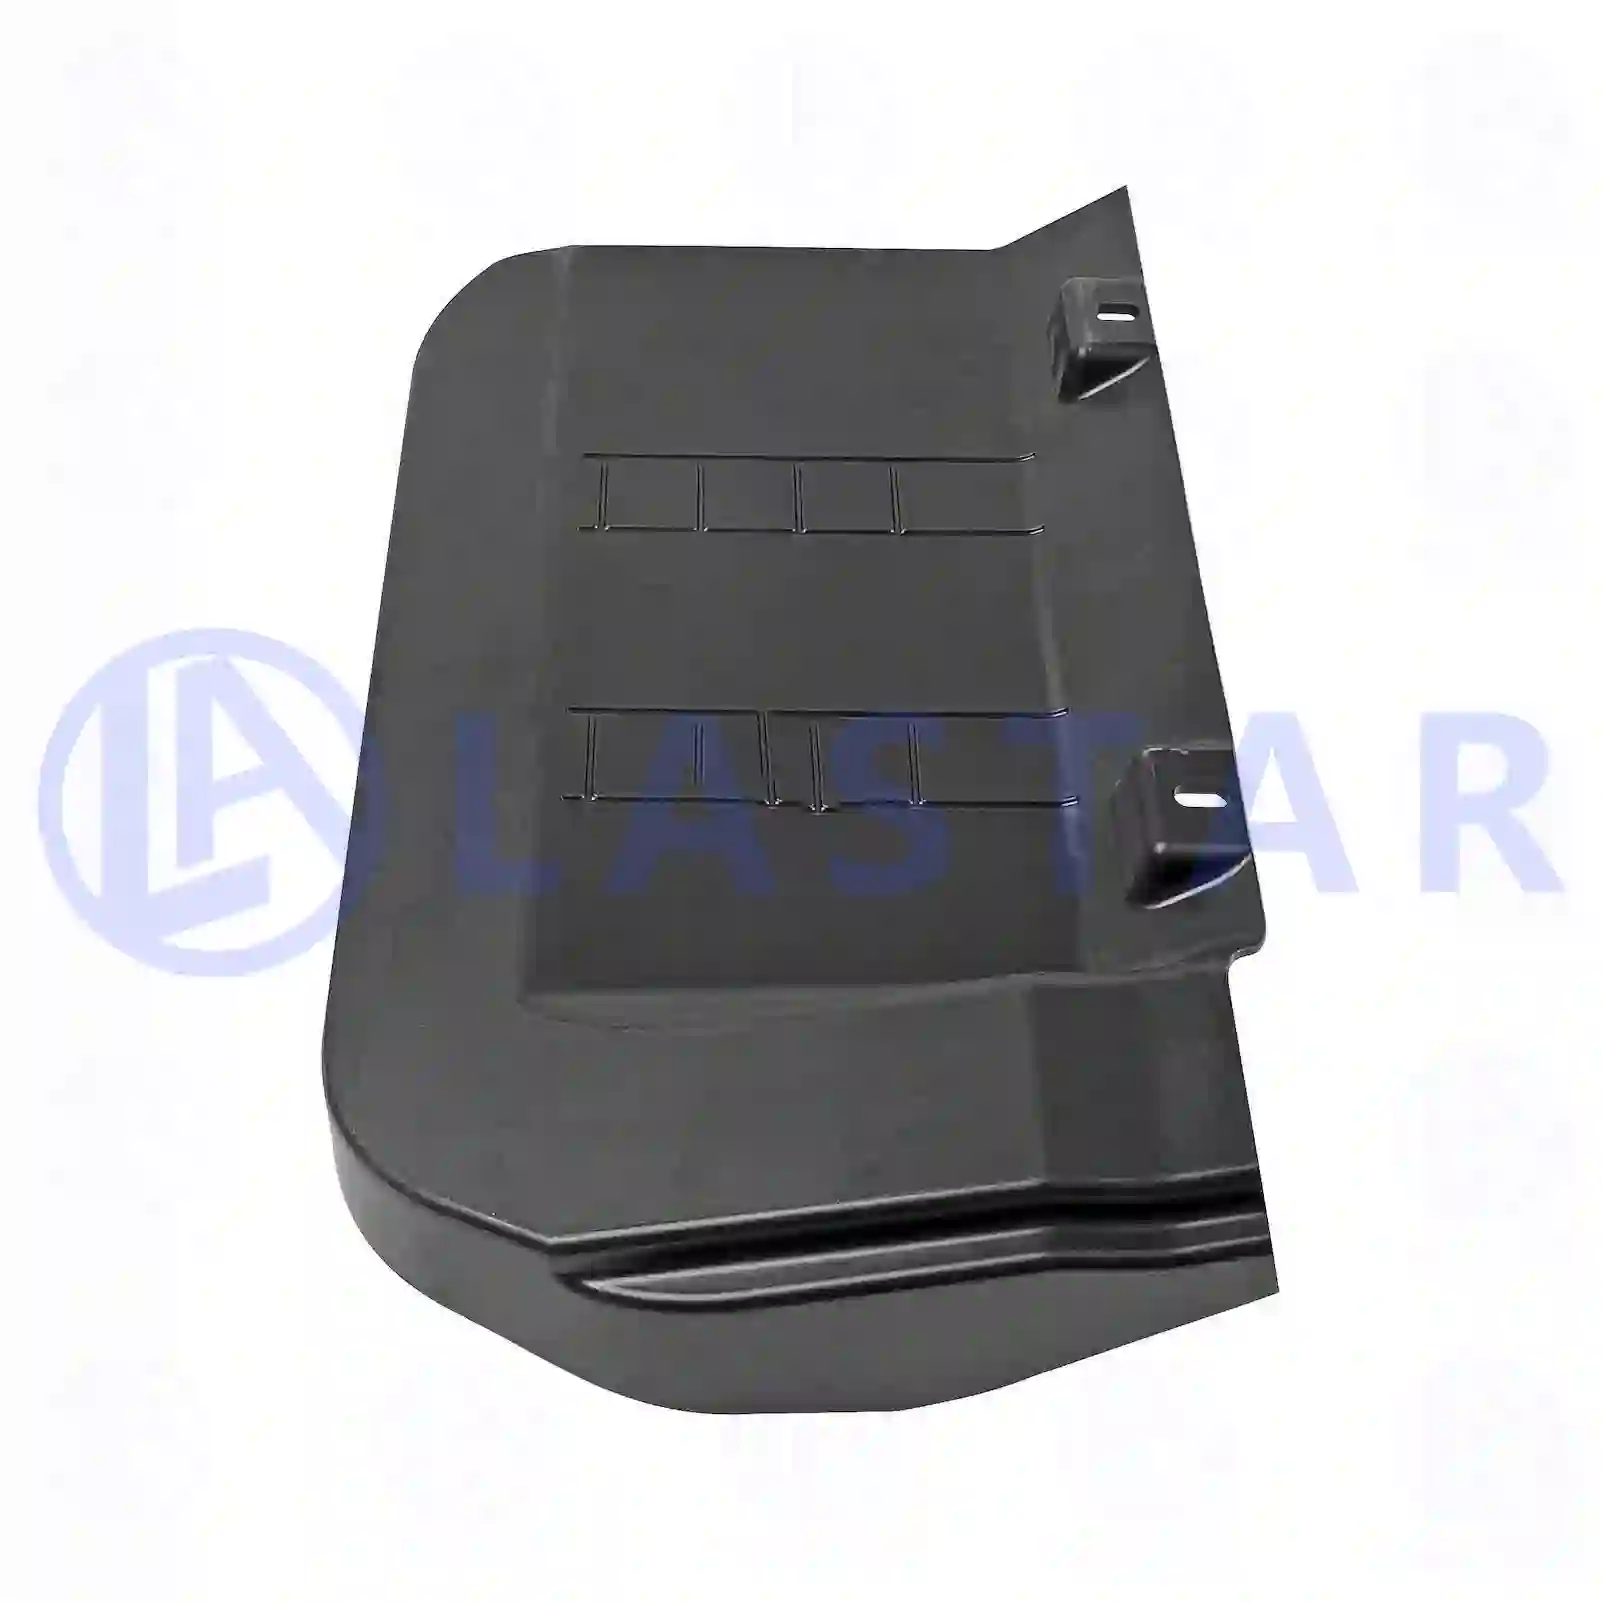 Battery cover, 77710080, 7420842821, 7421924924, 20842821, 21924924, ZG60029-0008 ||  77710080 Lastar Spare Part | Truck Spare Parts, Auotomotive Spare Parts Battery cover, 77710080, 7420842821, 7421924924, 20842821, 21924924, ZG60029-0008 ||  77710080 Lastar Spare Part | Truck Spare Parts, Auotomotive Spare Parts